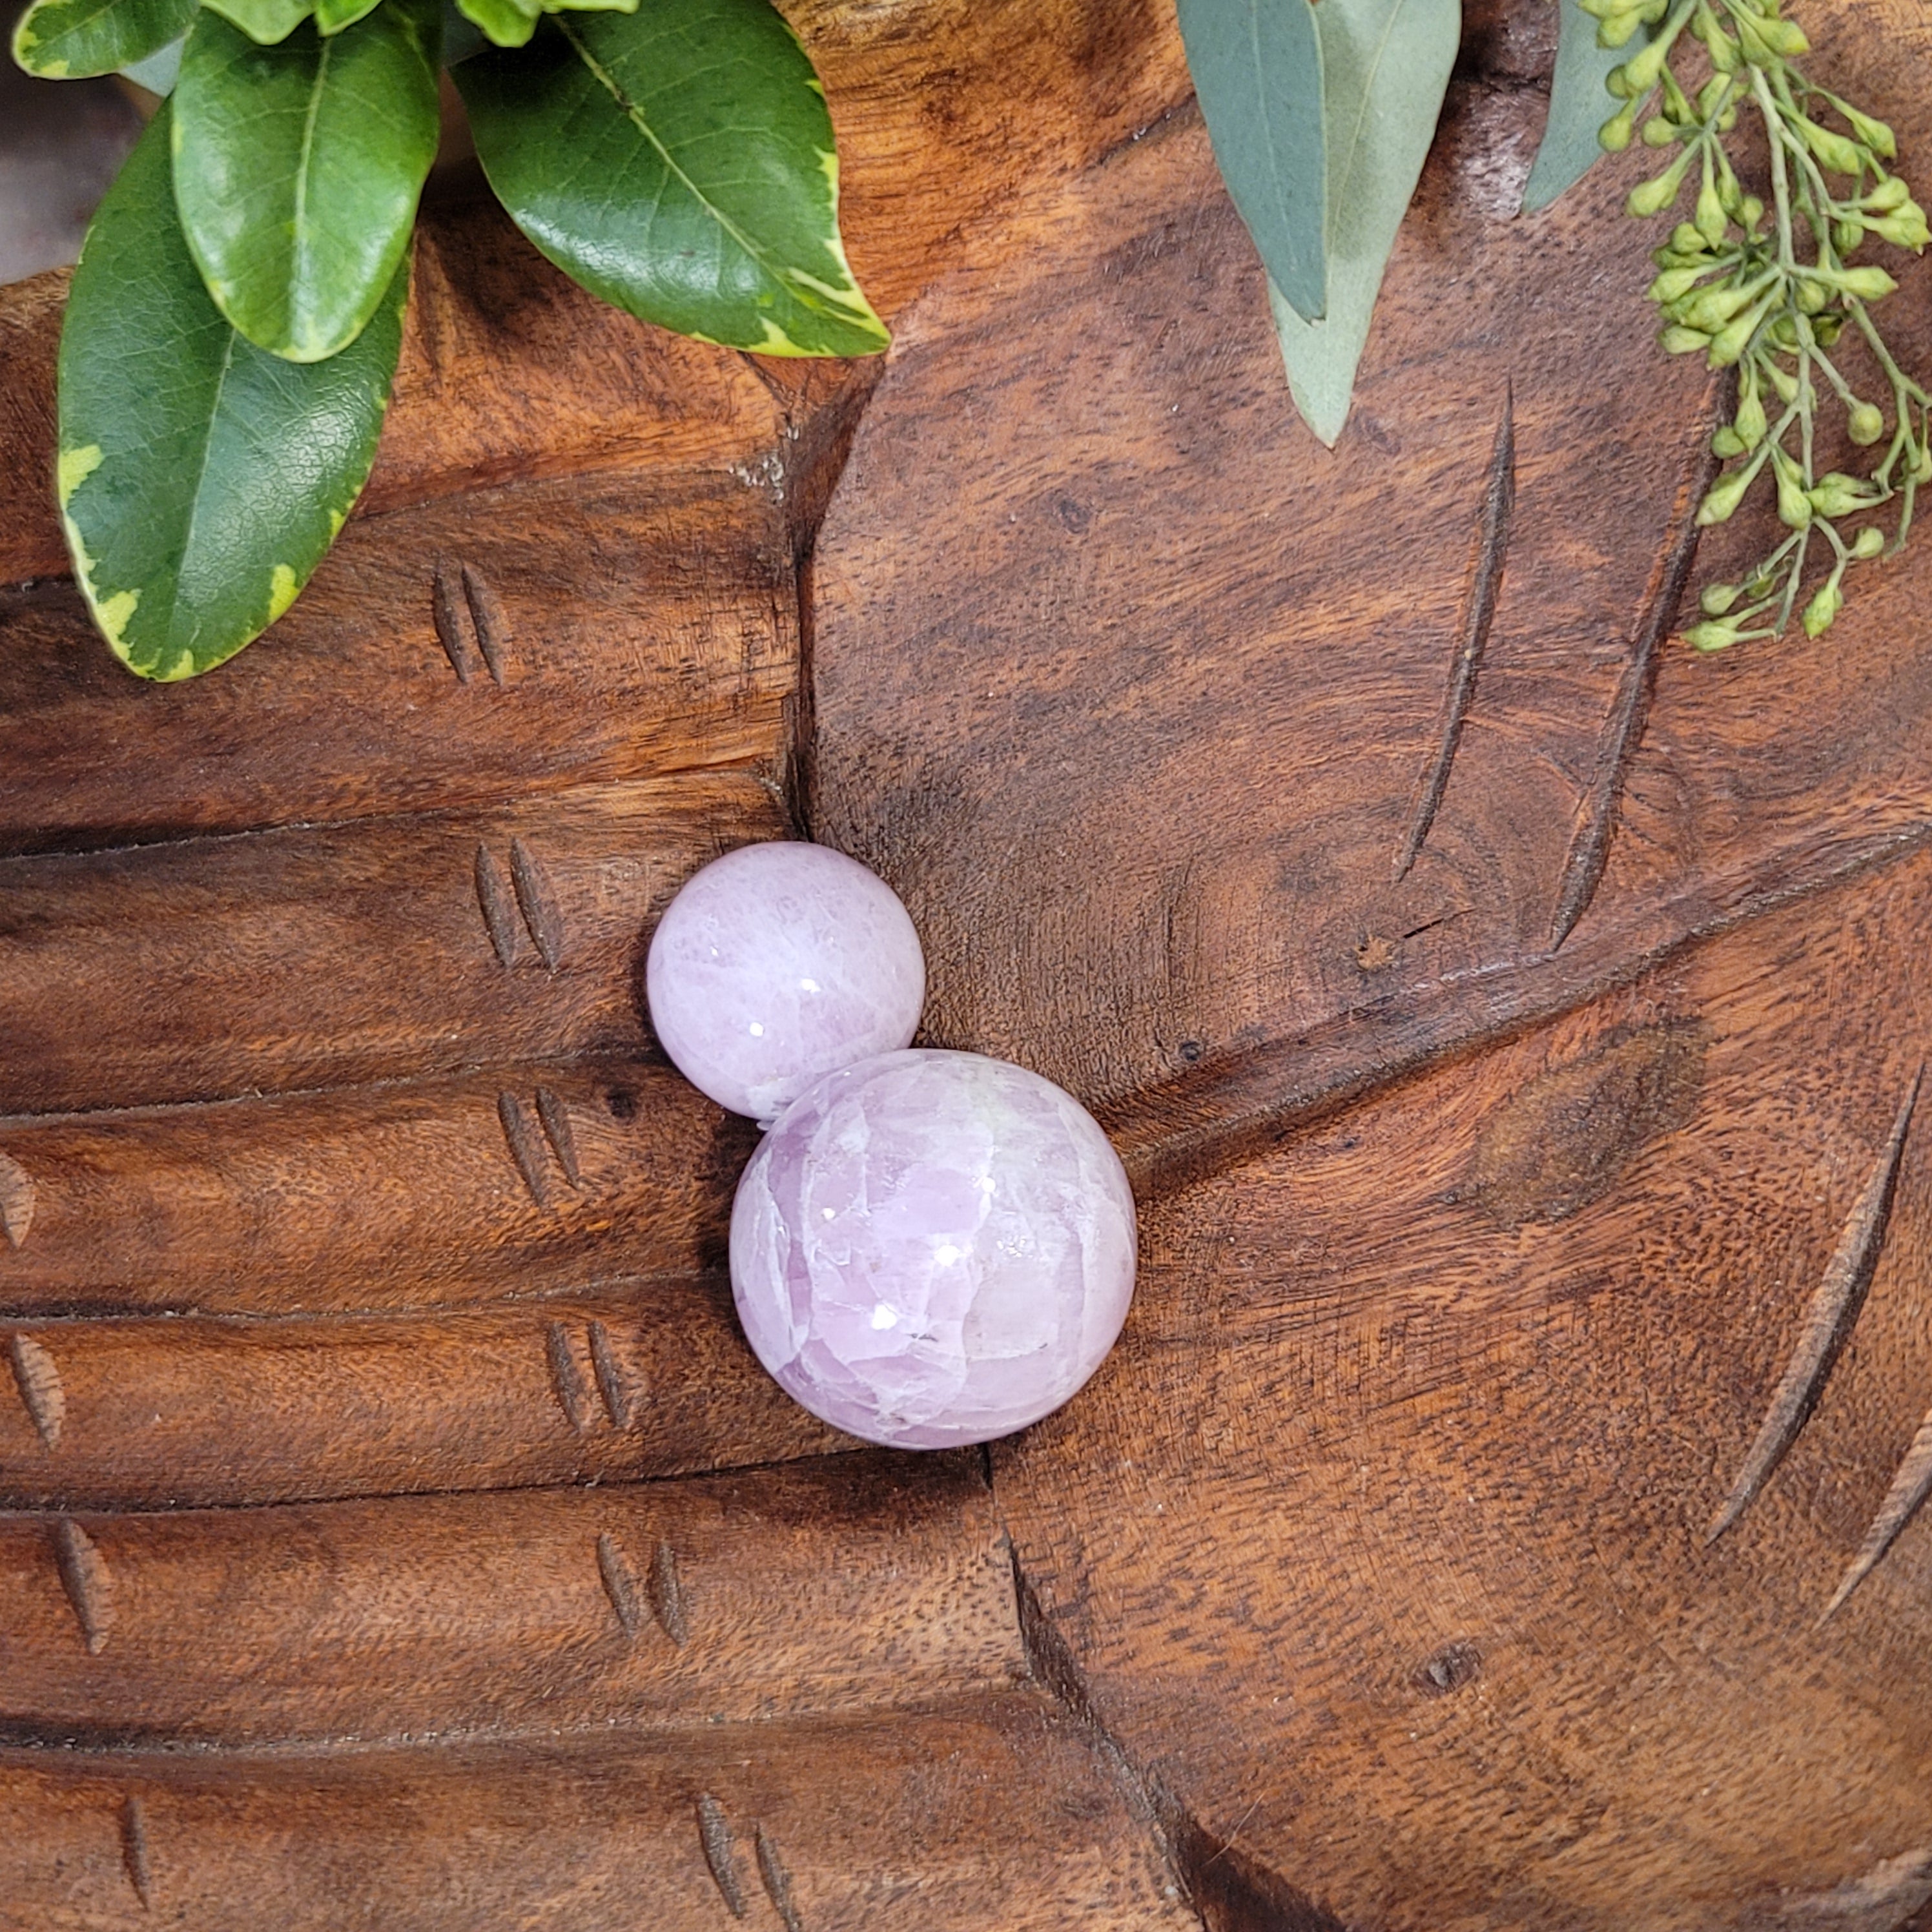 Kunzite Sphere for Emotional, Family Healing and Opening Your Heart to Love